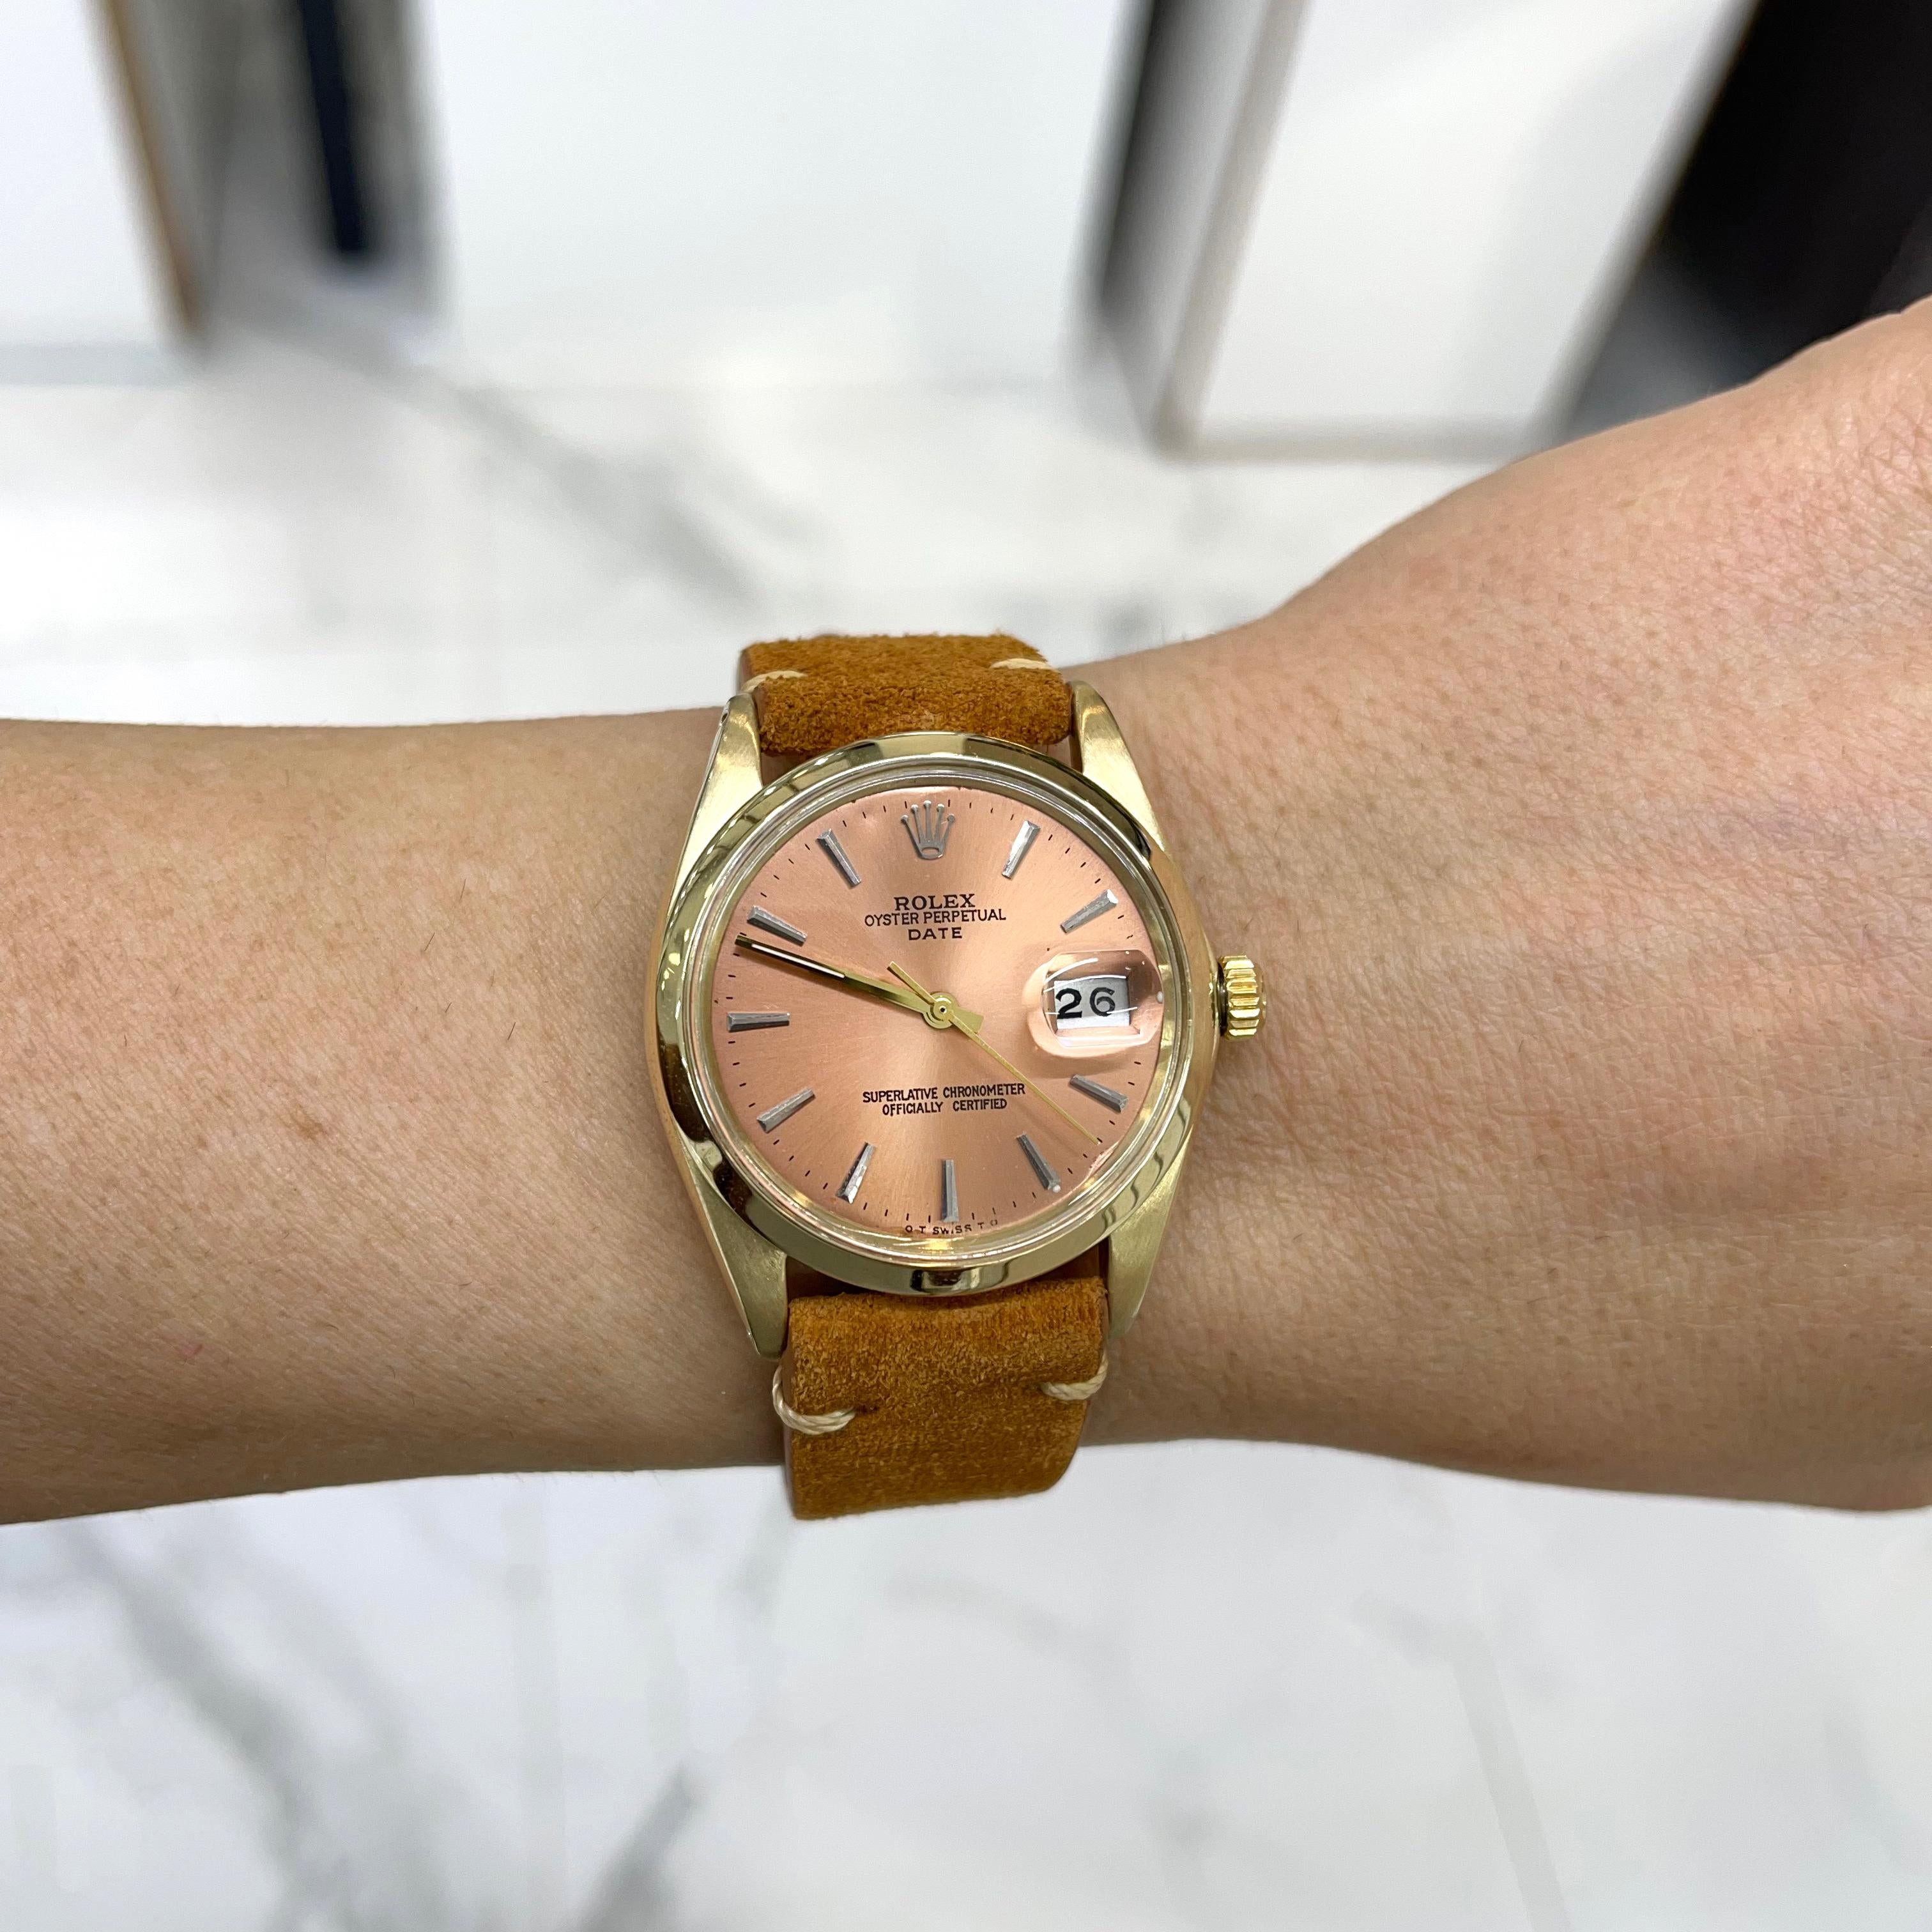 Vintage 1966 Rolex Oyster Perpetual Date Salmon Dial 14K Yellow Gold Watch For Sale 2